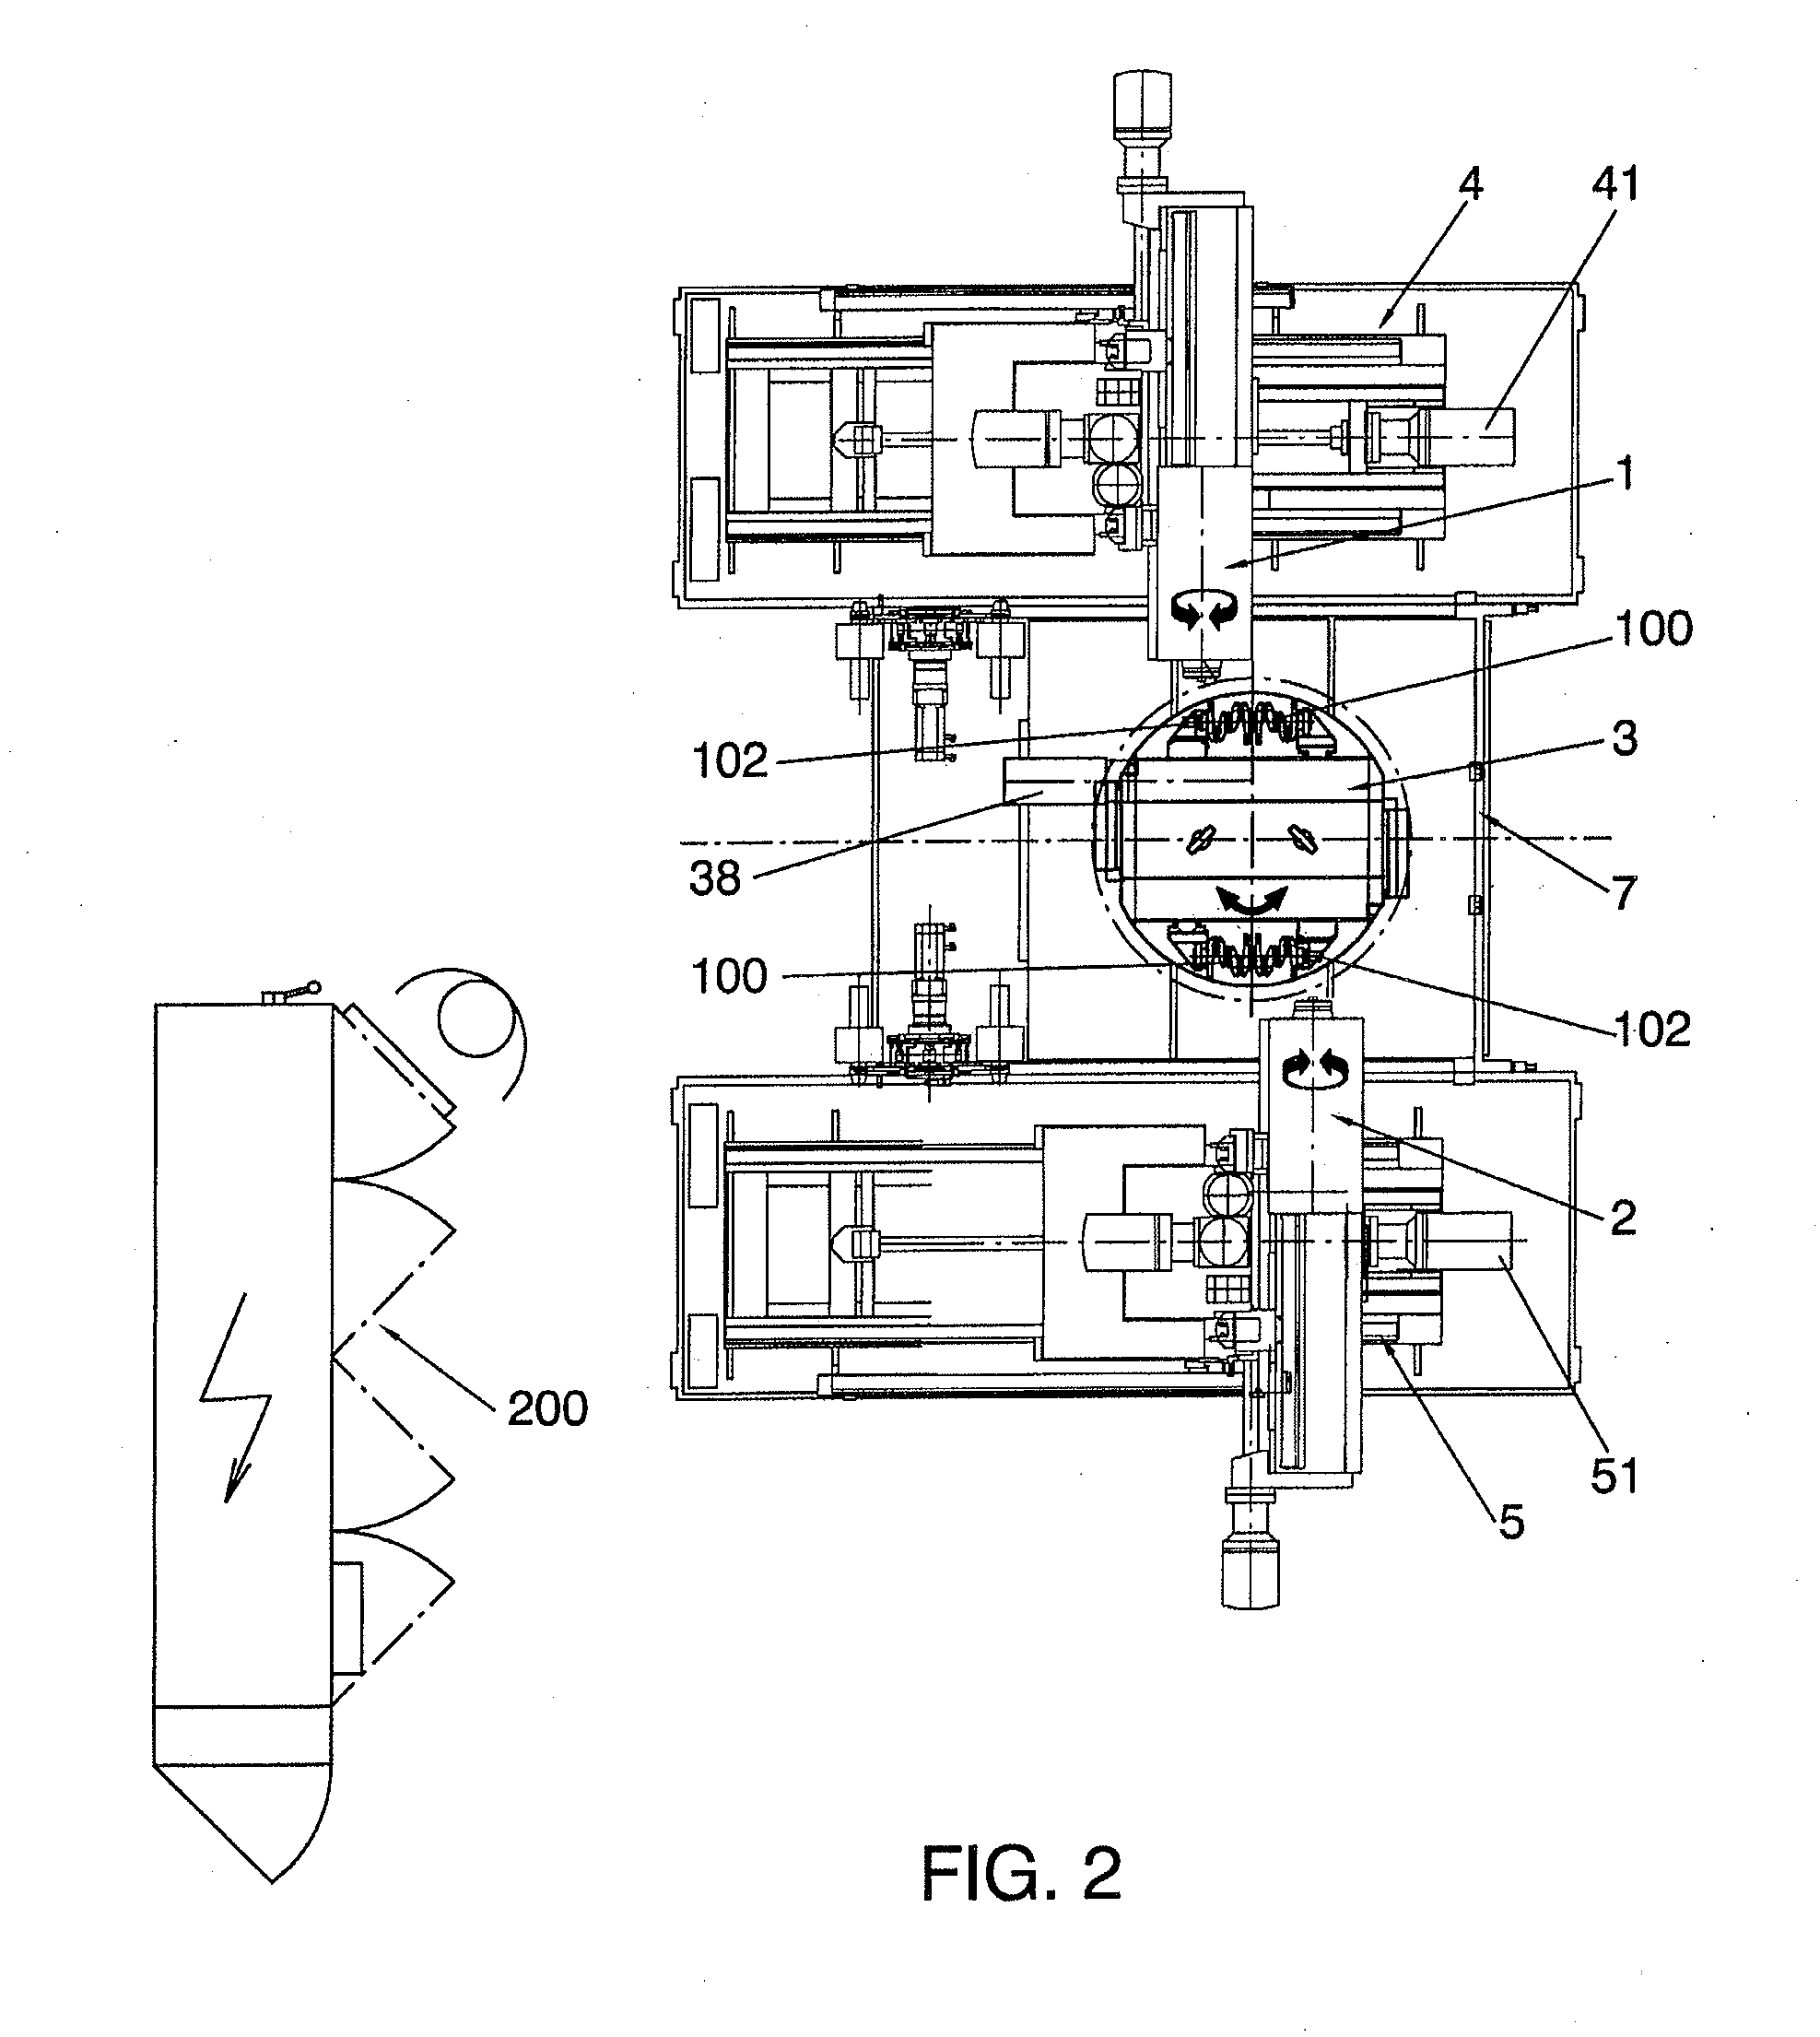 Machine and method for machining ends of crankshafts